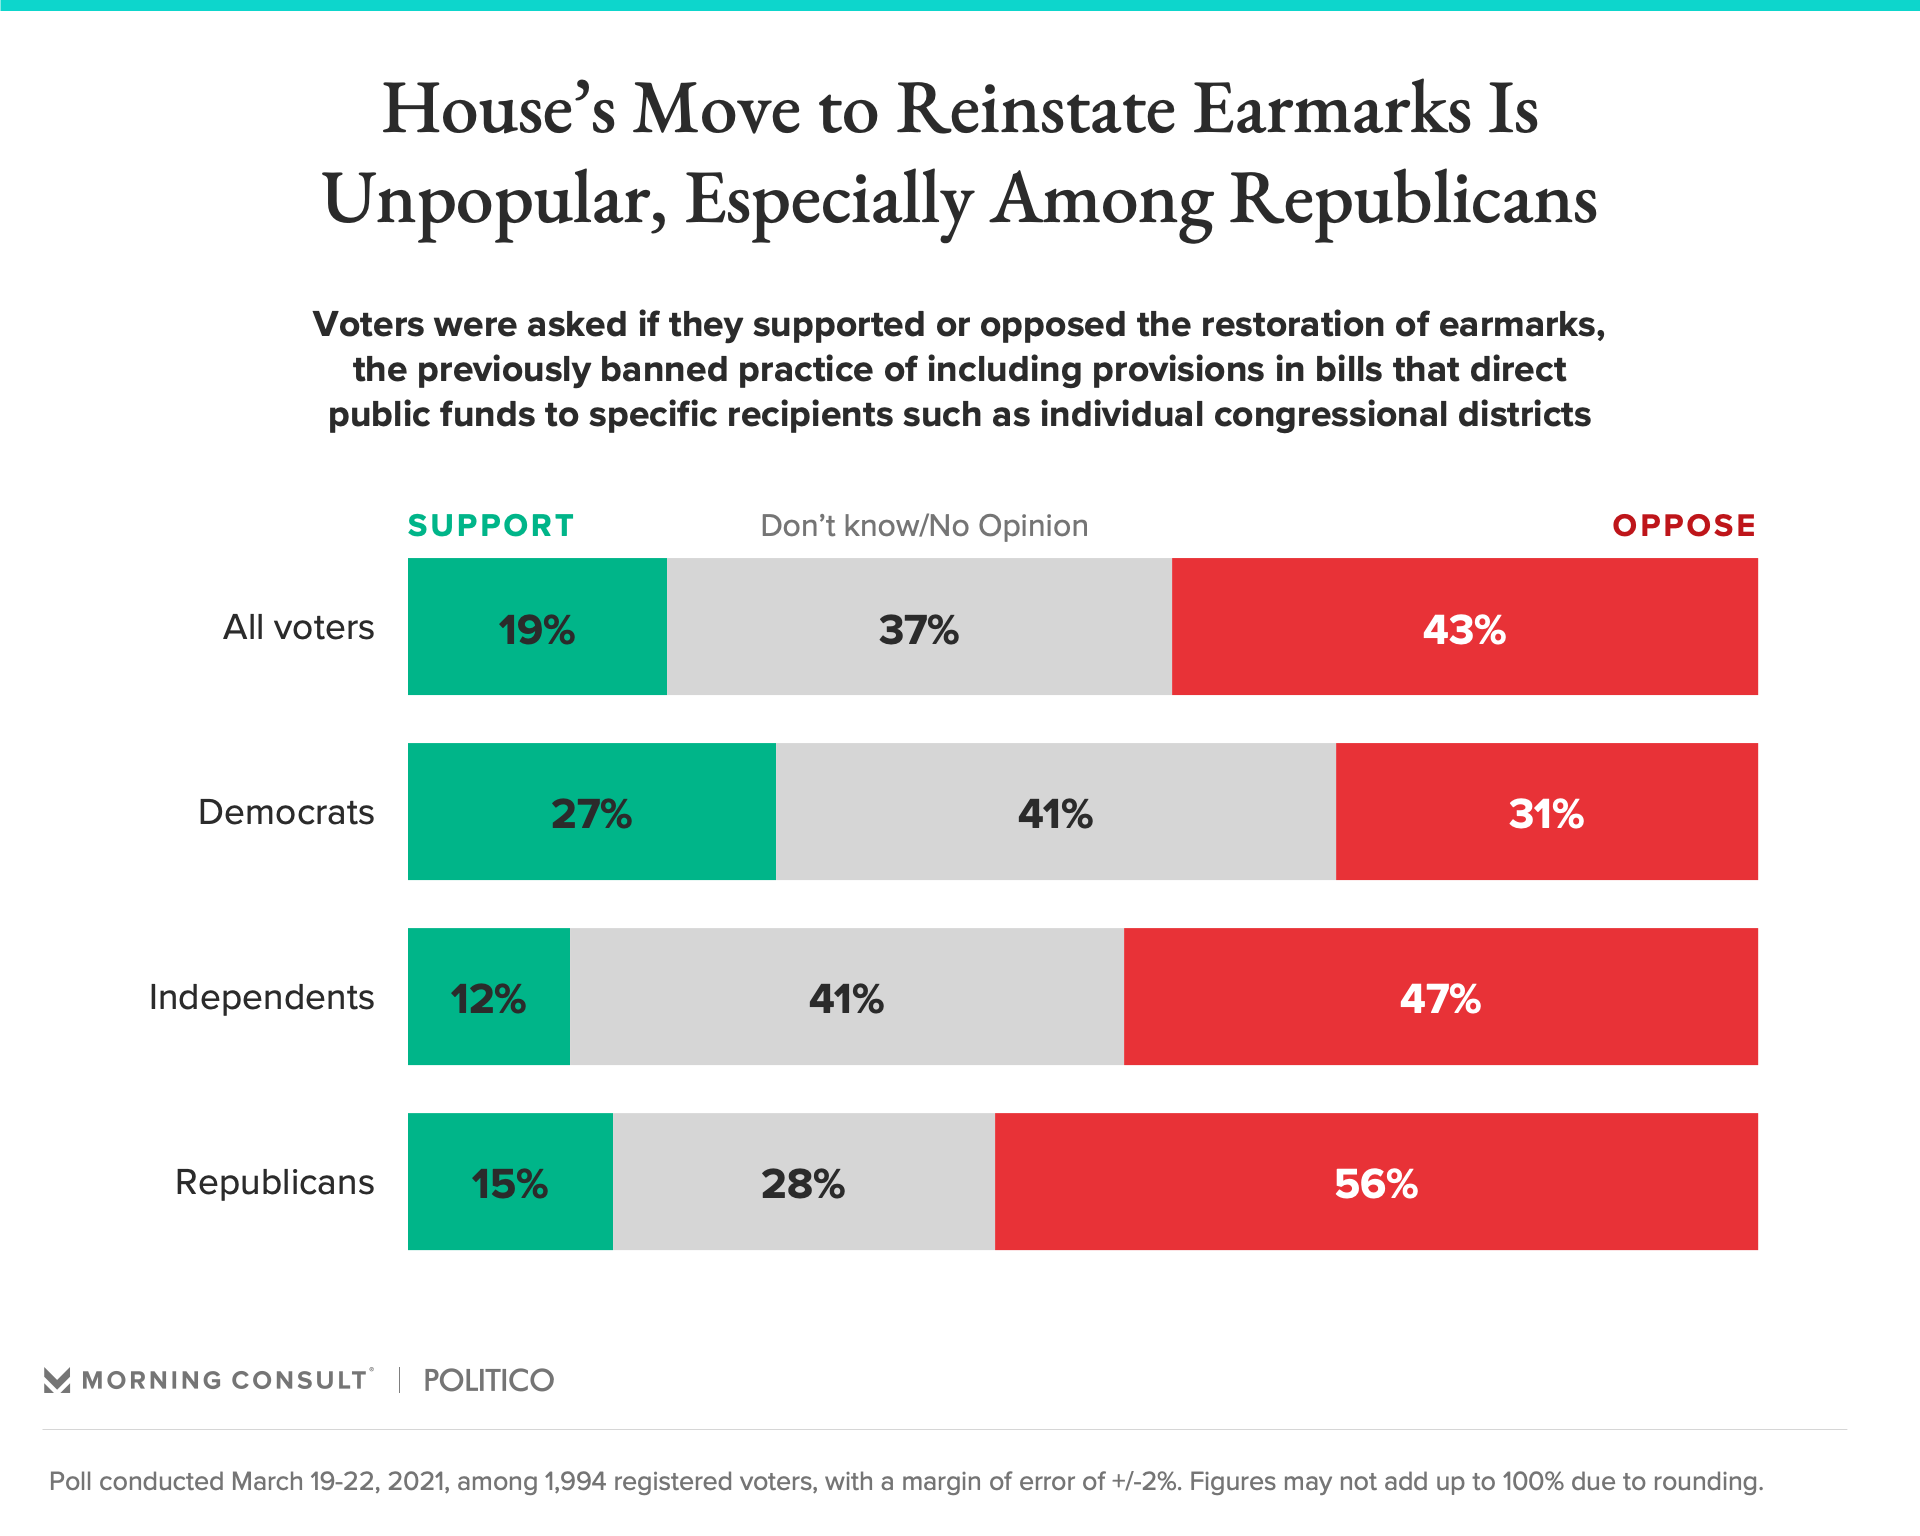 Most GOP Voters Oppose House’s Move to Bring Back Earmarks Morning